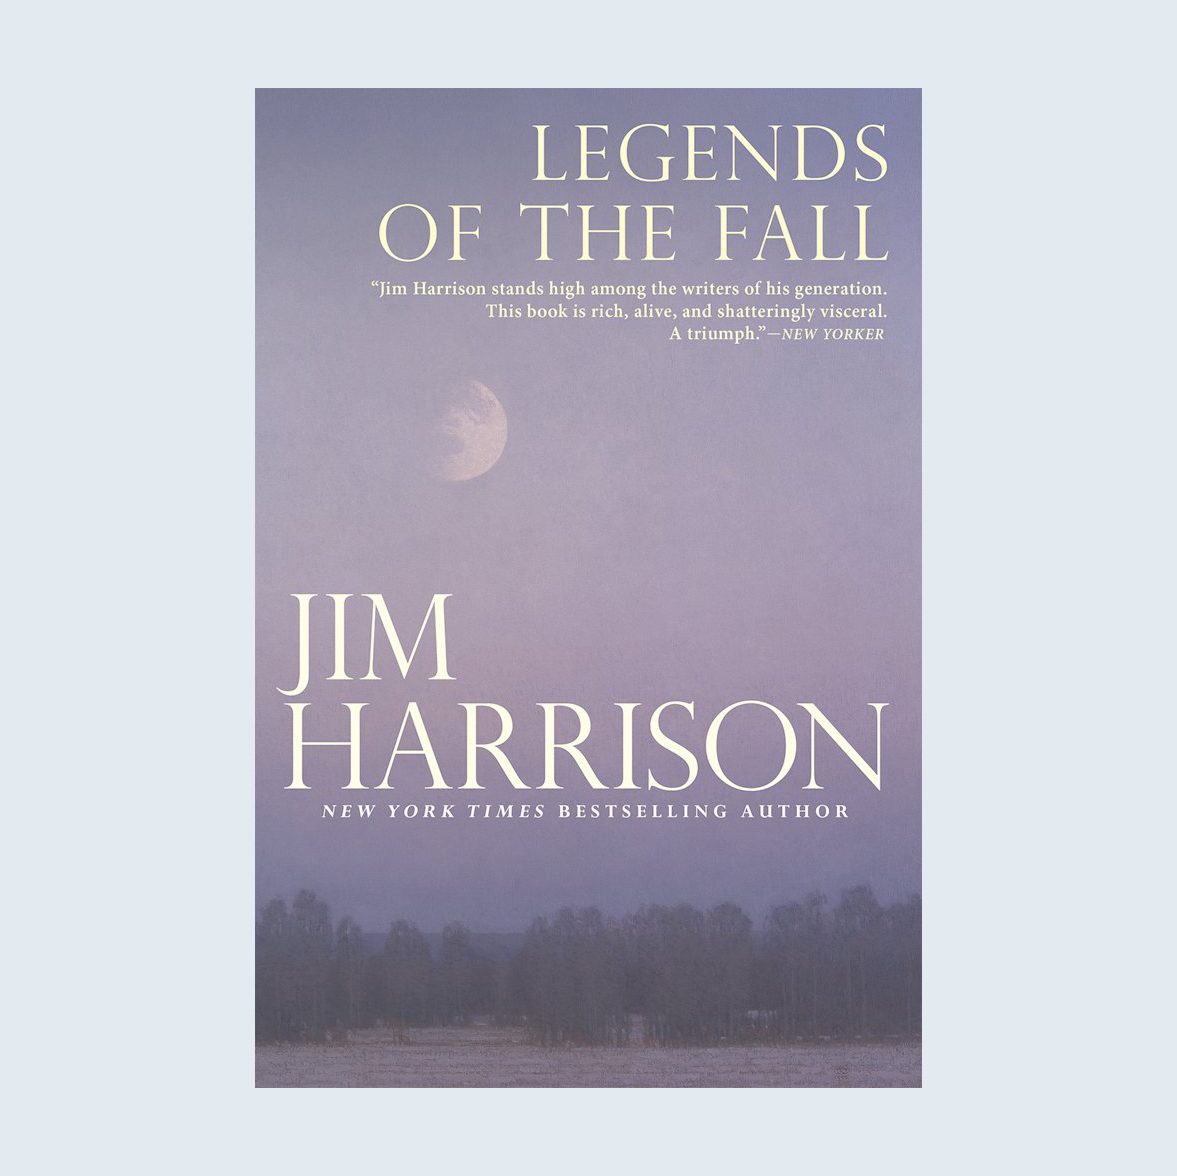 Legends of the Fall by Jim Harrison, for Fathers Day